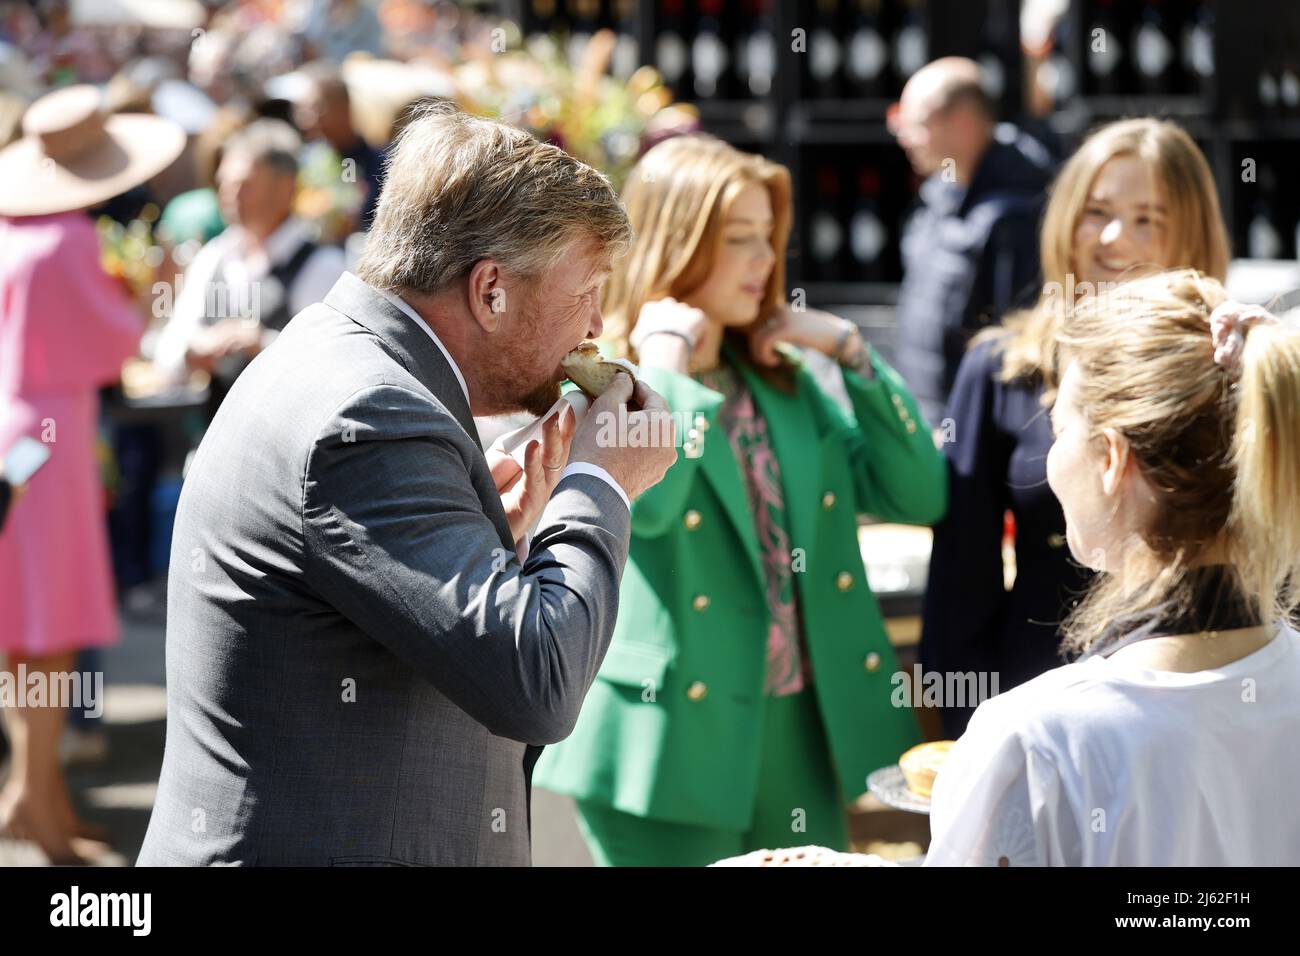 2022-04-27 12:17:30 MAASTRICHT - King Willem-Alexander during King's Day in Maastricht. After two silent corona years, the Dutch celebrate King's Day as usual. ANP SEM VAN DER WAL netherlands out - belgium out Stock Photo